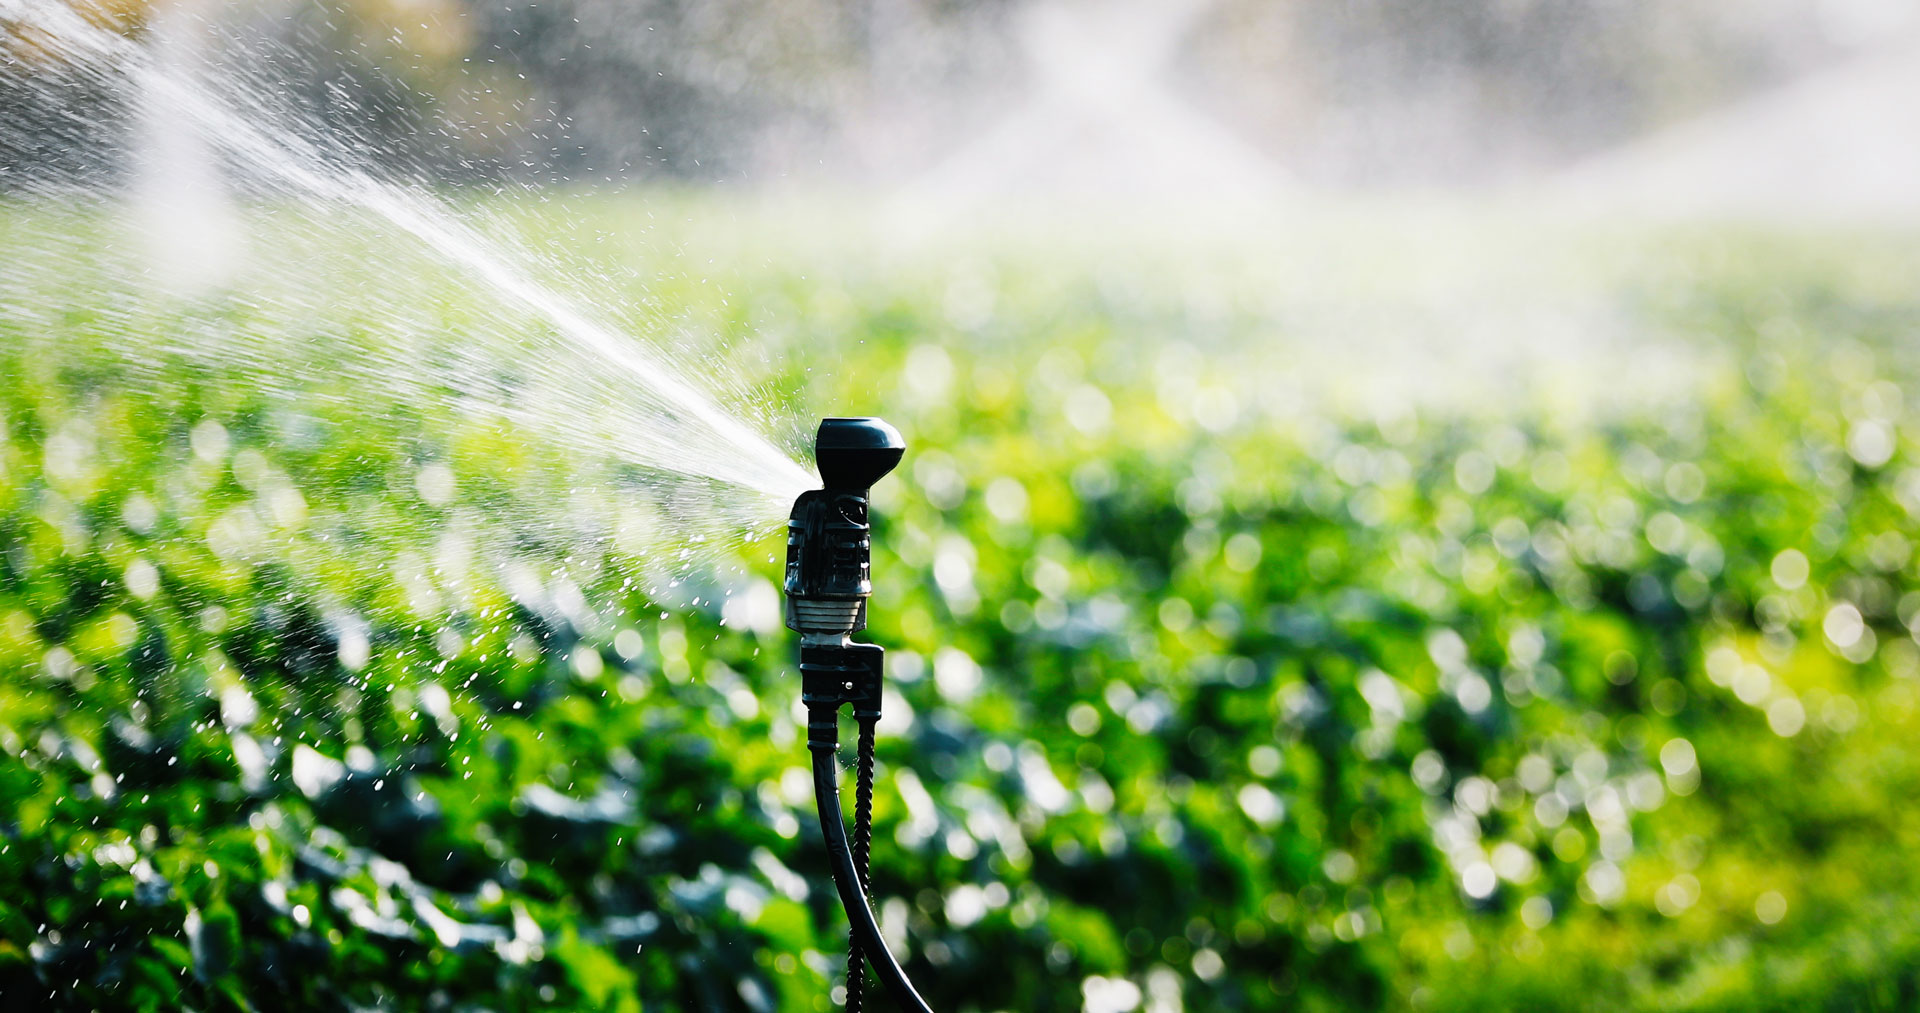 irrigation-system-in-function-watering-agricultura-ZFBTSN8